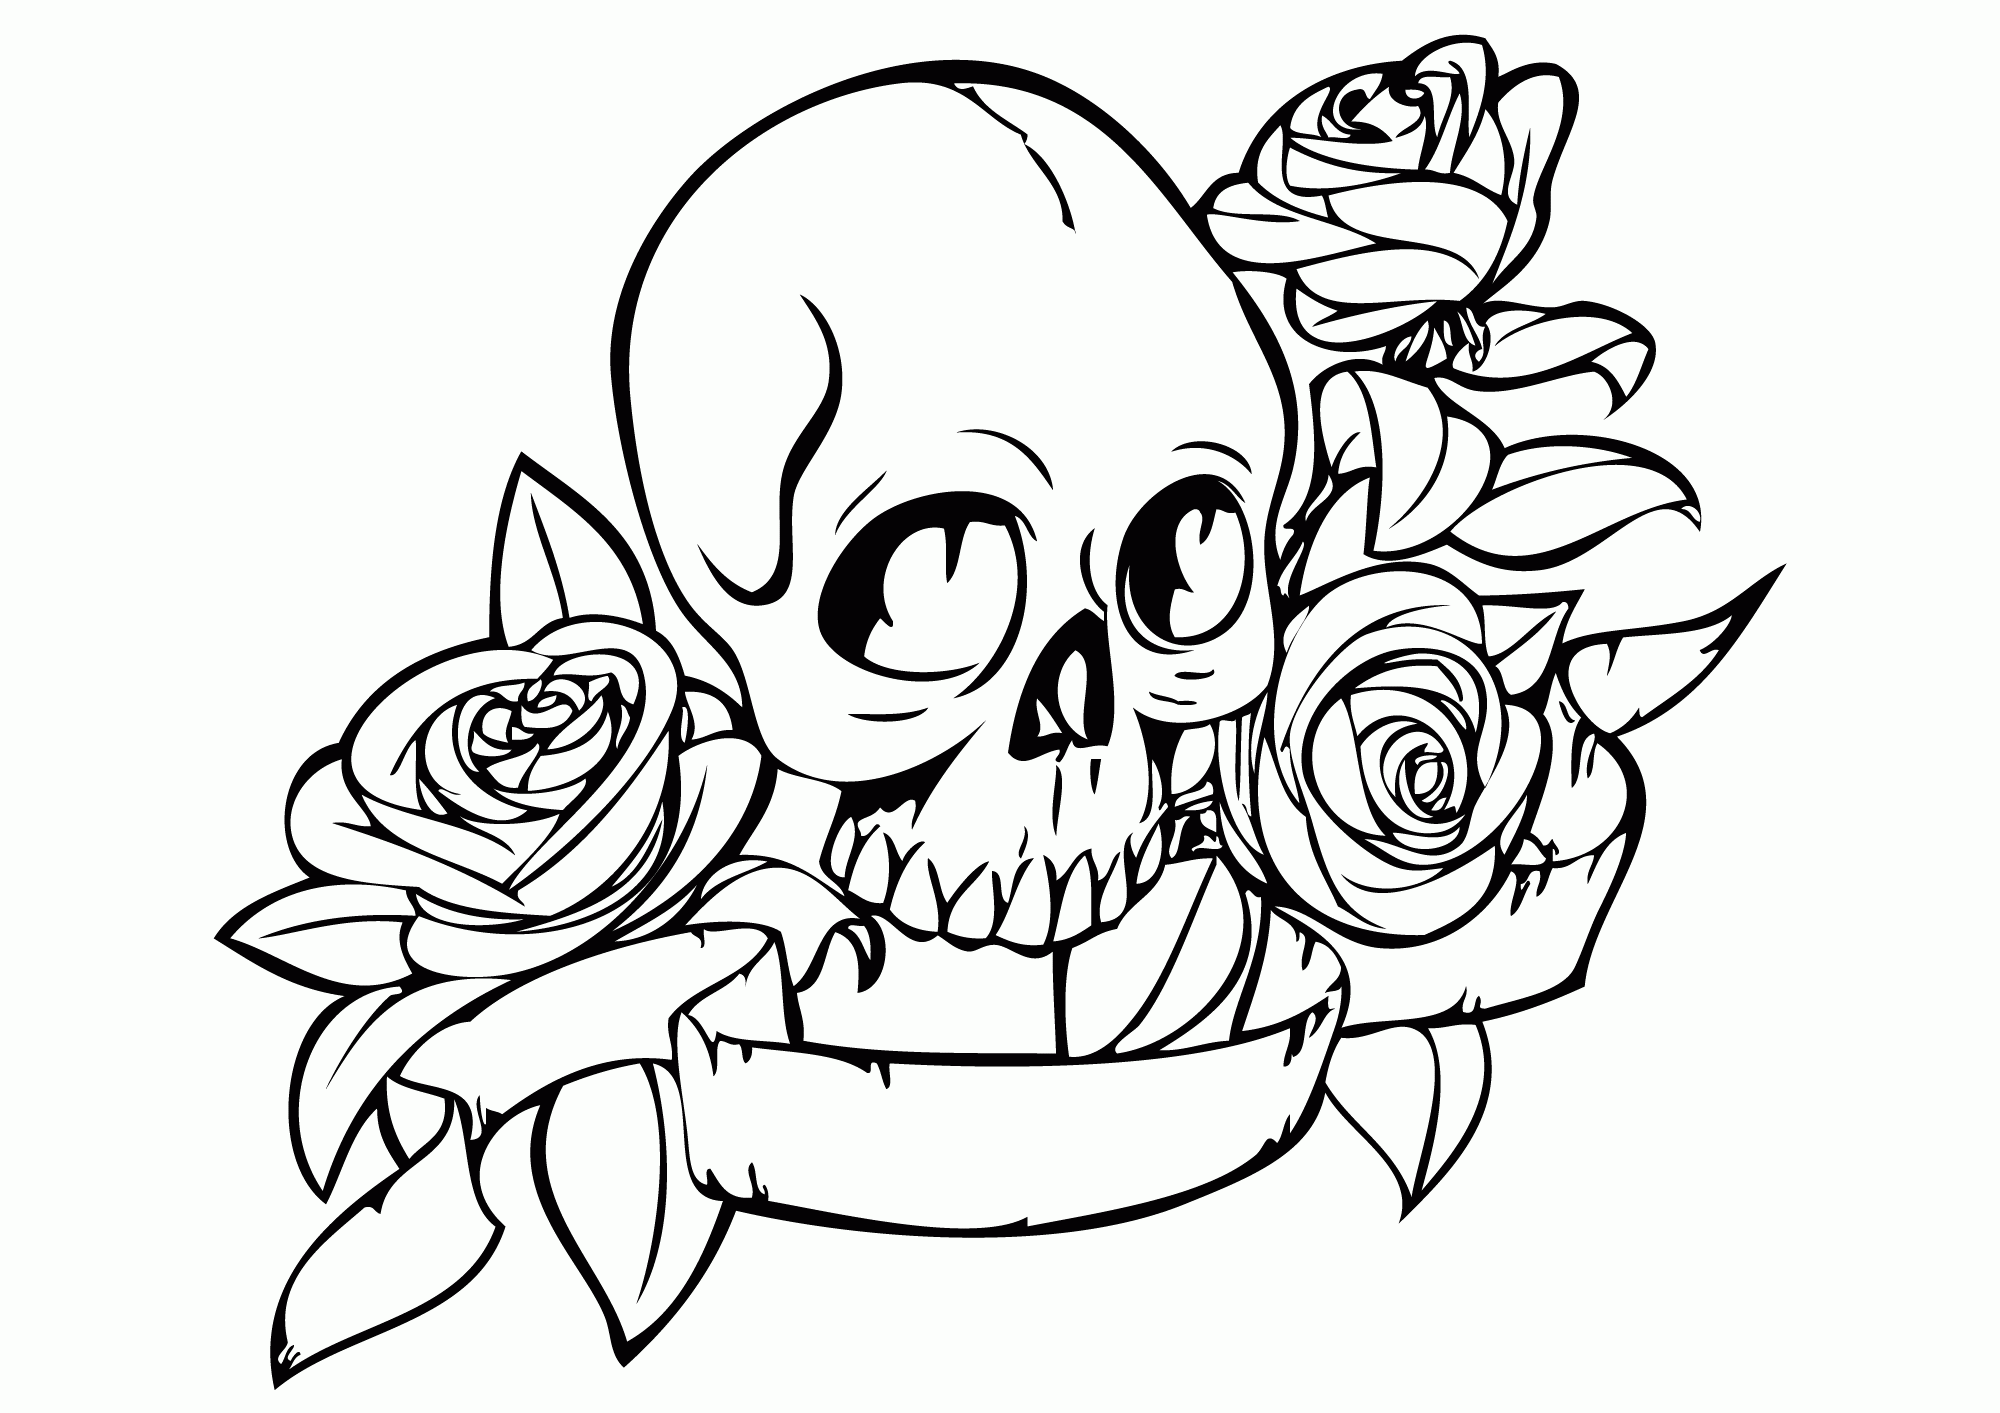 Download Skull Coloring Pages For Girls - Coloring Home